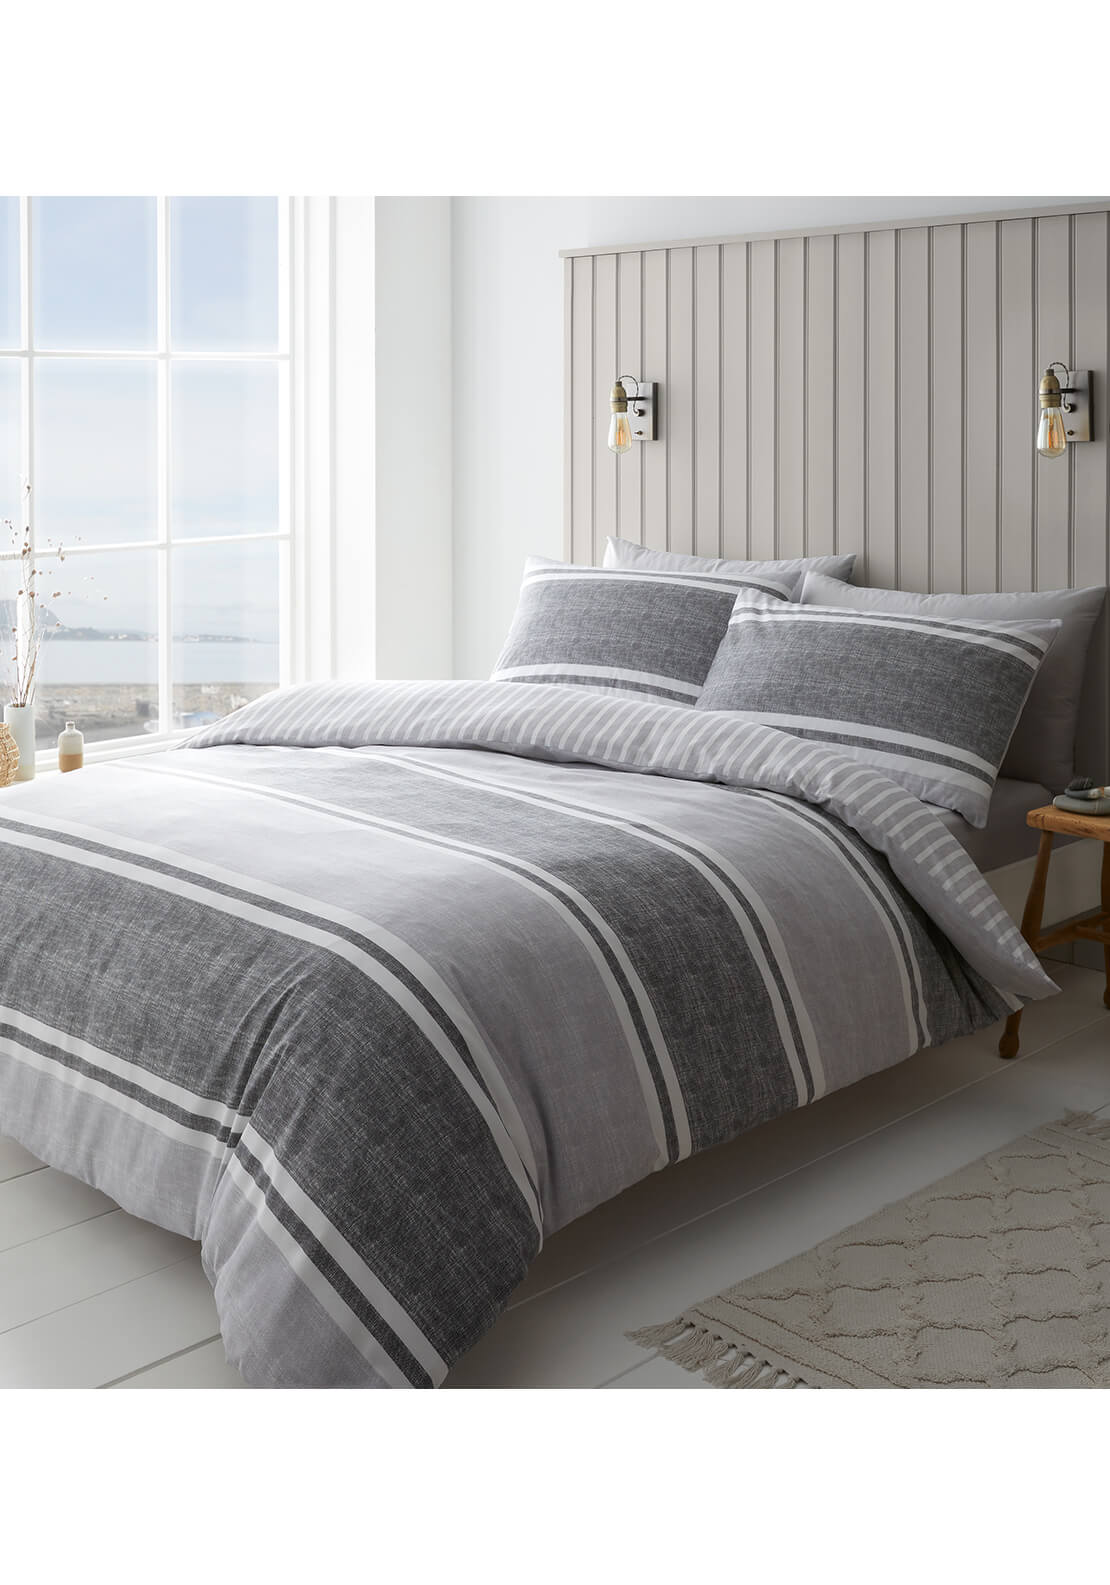  The Home Collection Classic Textured Banded Stripe Reversible Duvet Cover Set - Grey 1 Shaws Department Stores